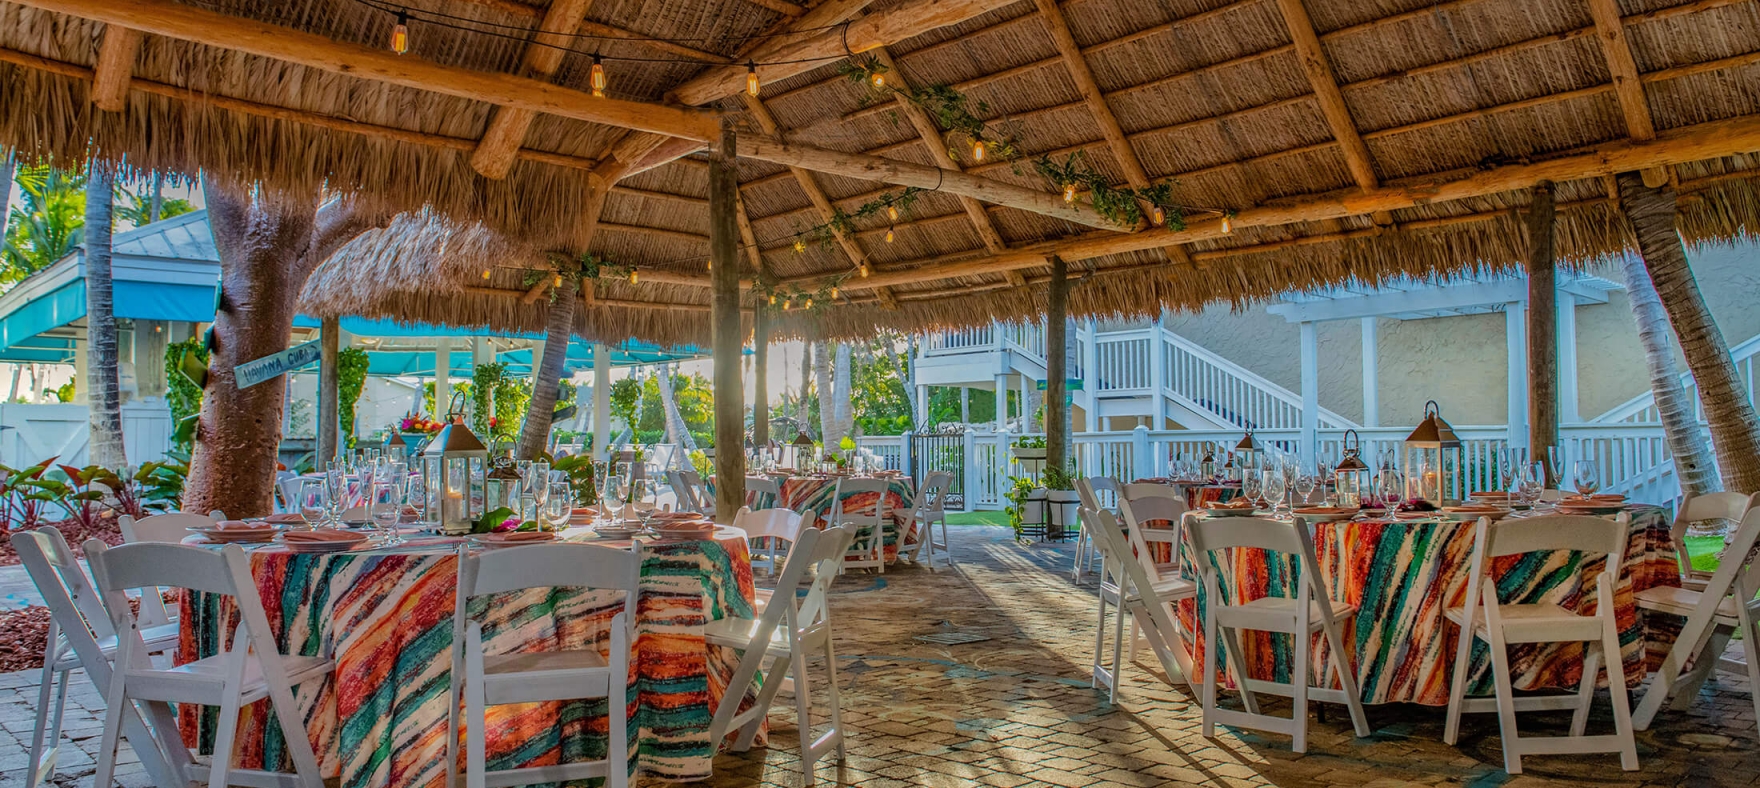 Tiki Hut dining layout and decor with string lights on the straw rooftop